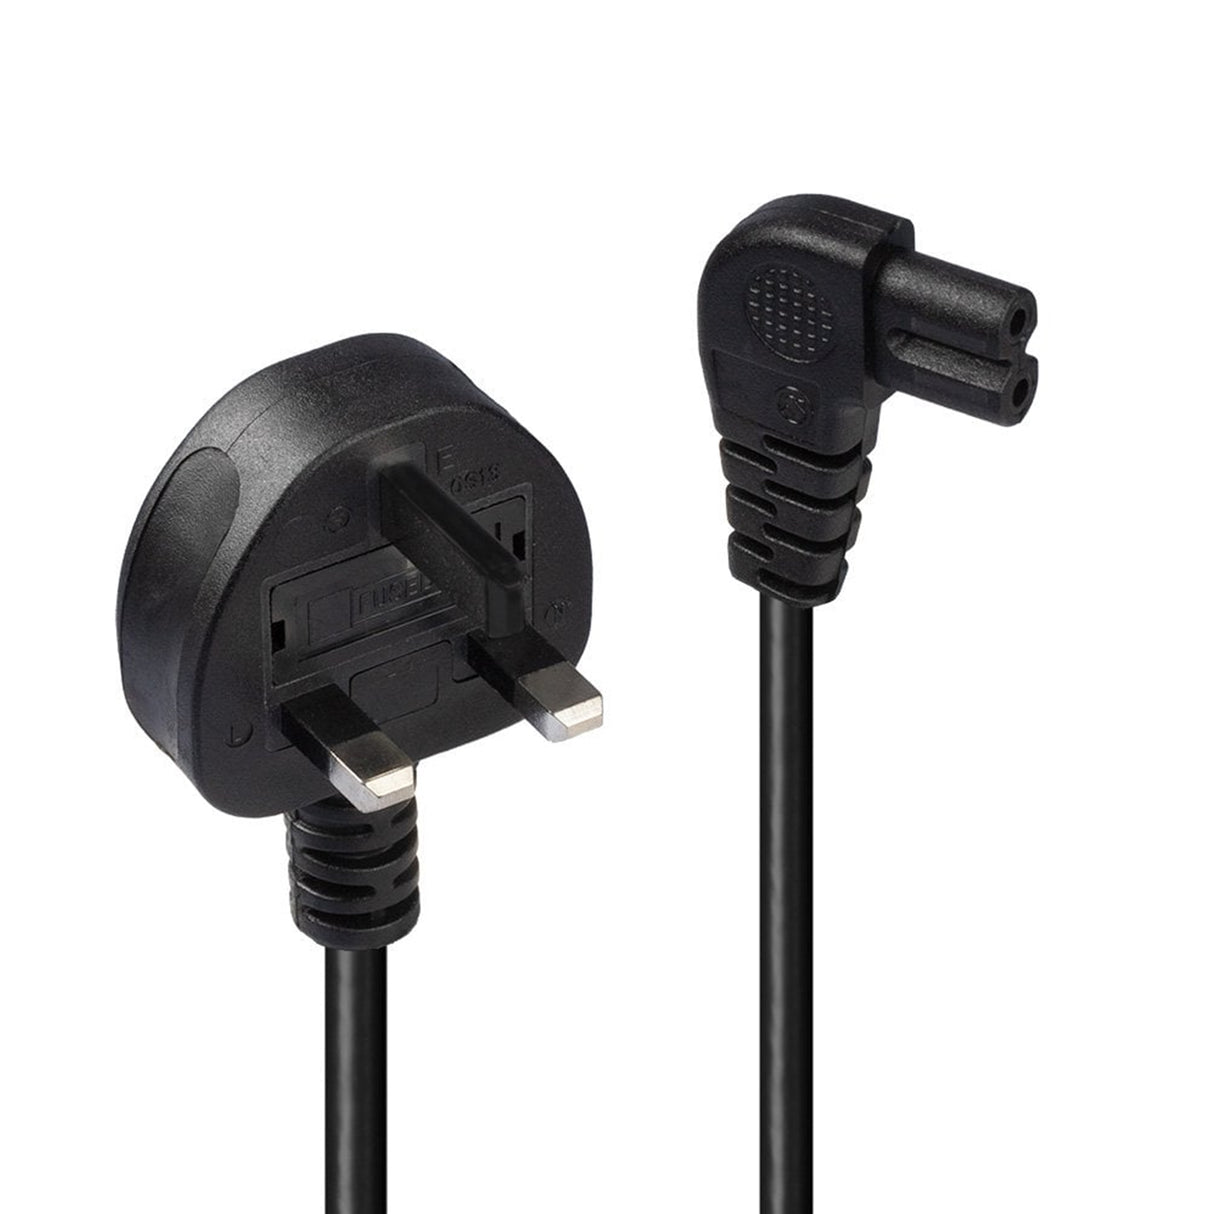 LINDY 30454 0.5m UK 3 Pin Plug to Right Angled IEC C7 mains power Cable, Black